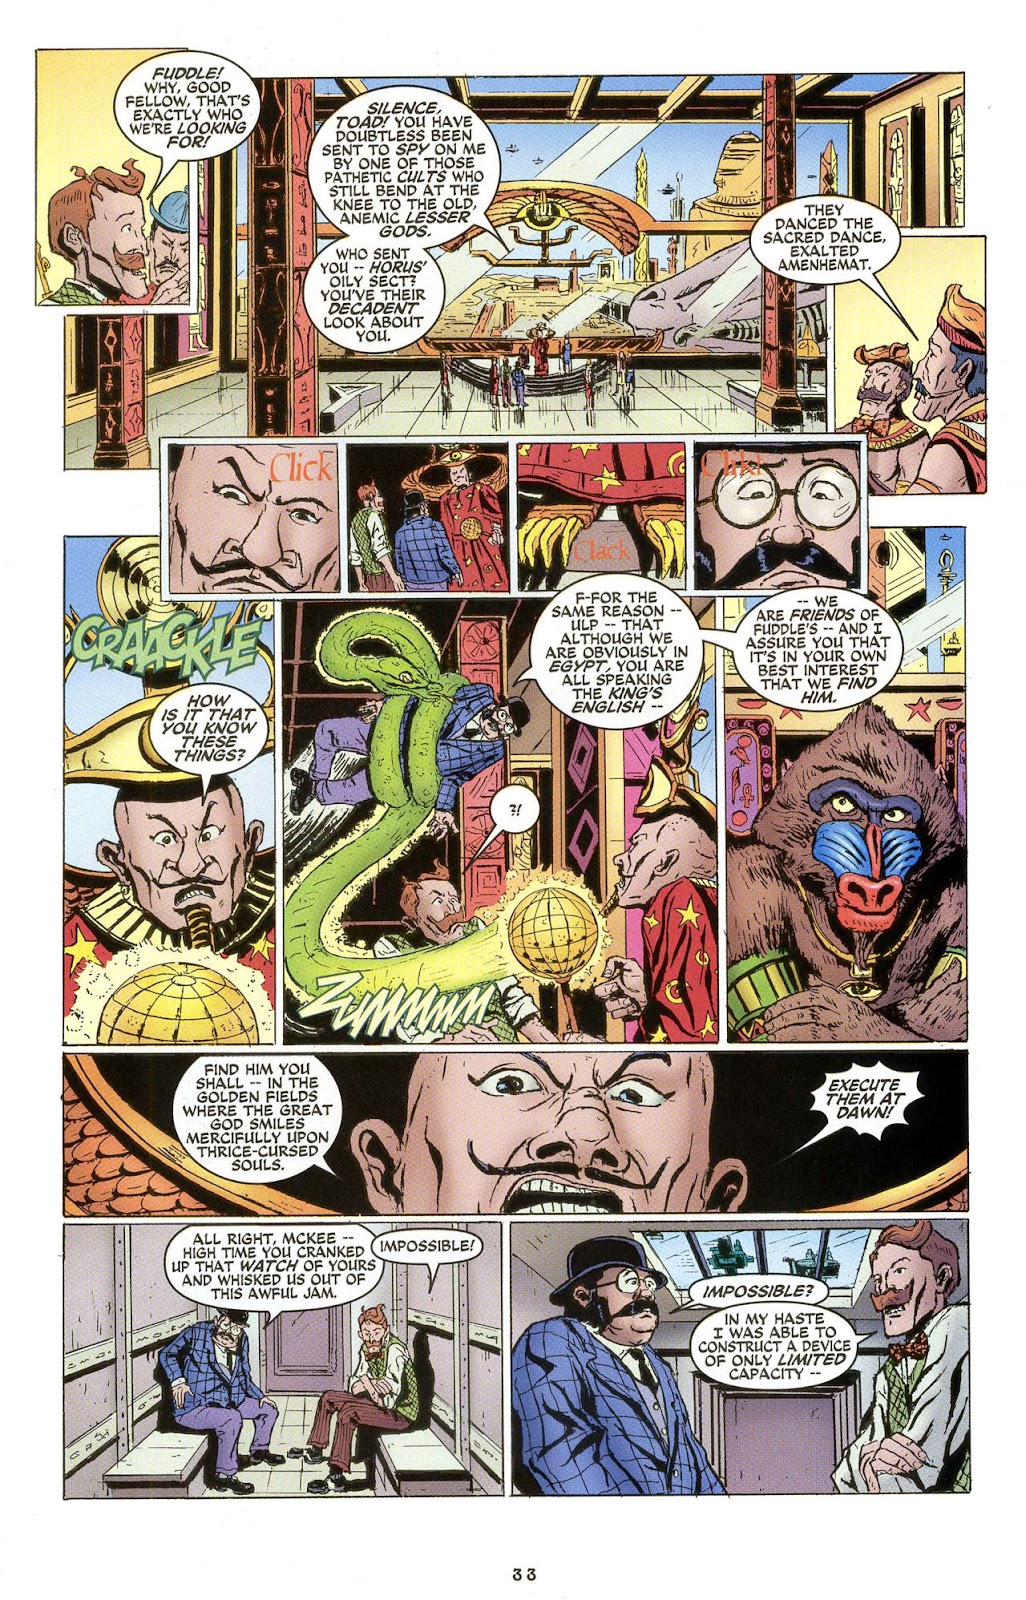 The Remarkable Worlds of Professor Phineas B. Fuddle issue 1 - Page 31